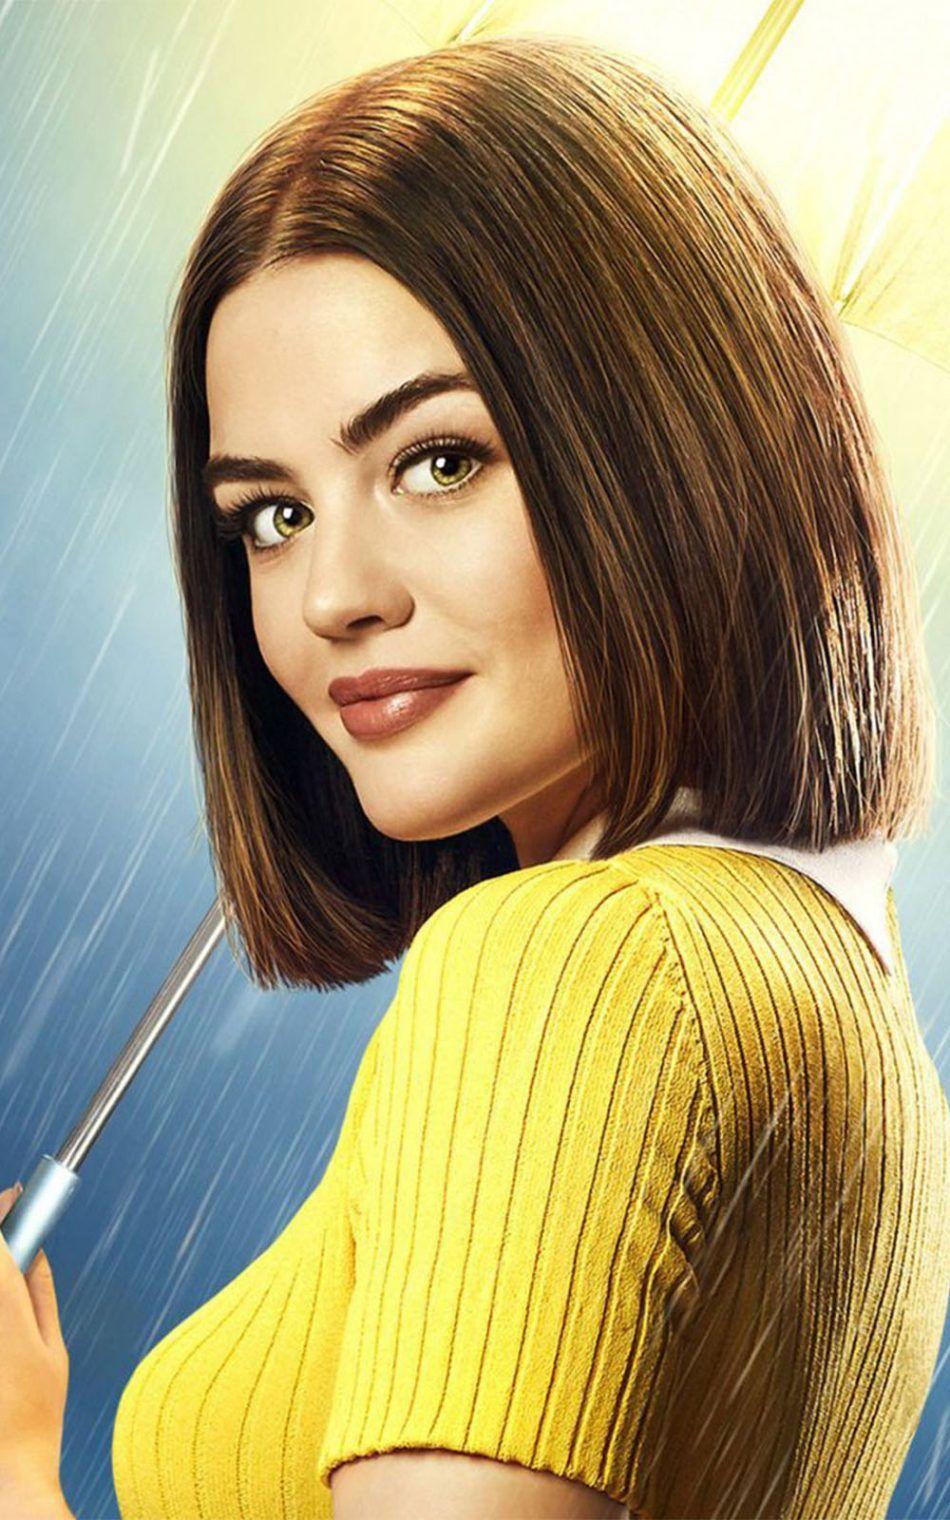 Lucy Hale In Life Sentence Series Free 4K Ultra HD Mobile Wallpaper